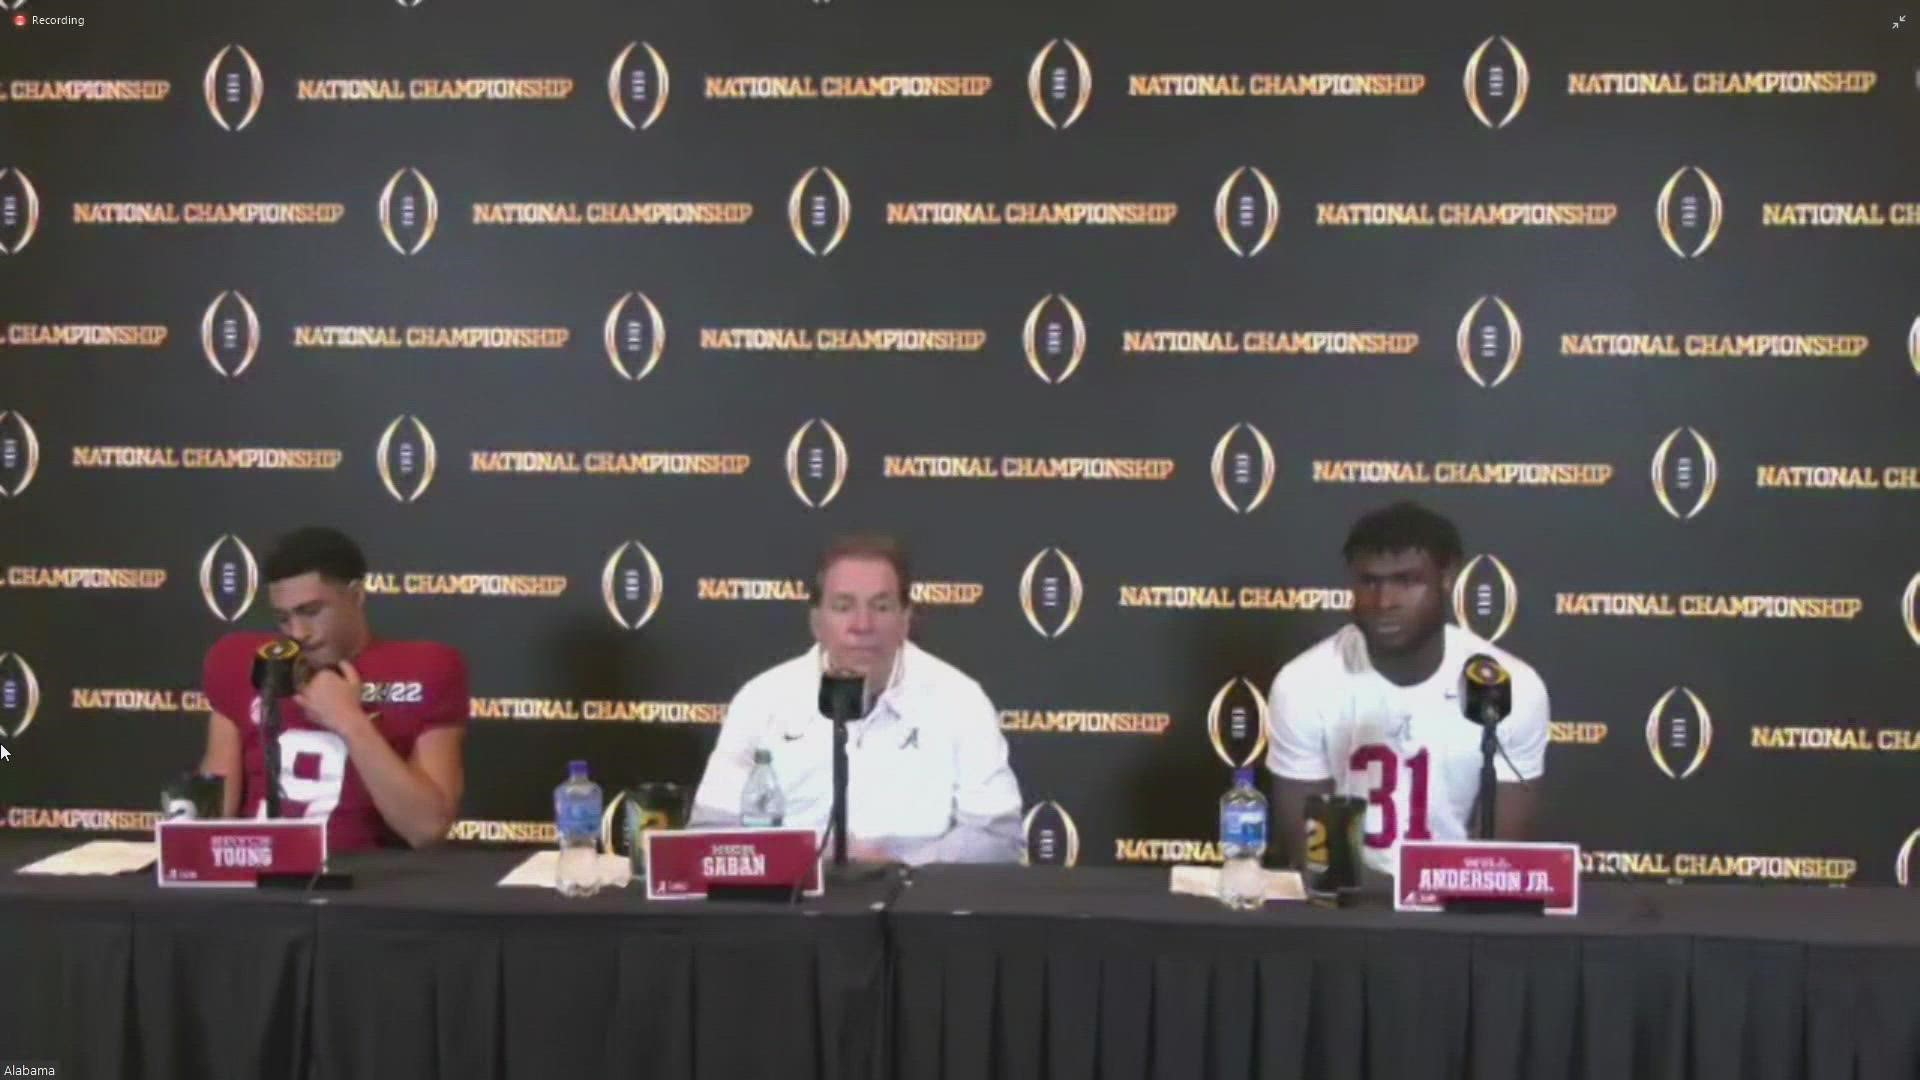 College Football Championship Postgame after Alabama's 33-18 loss to Georgia.